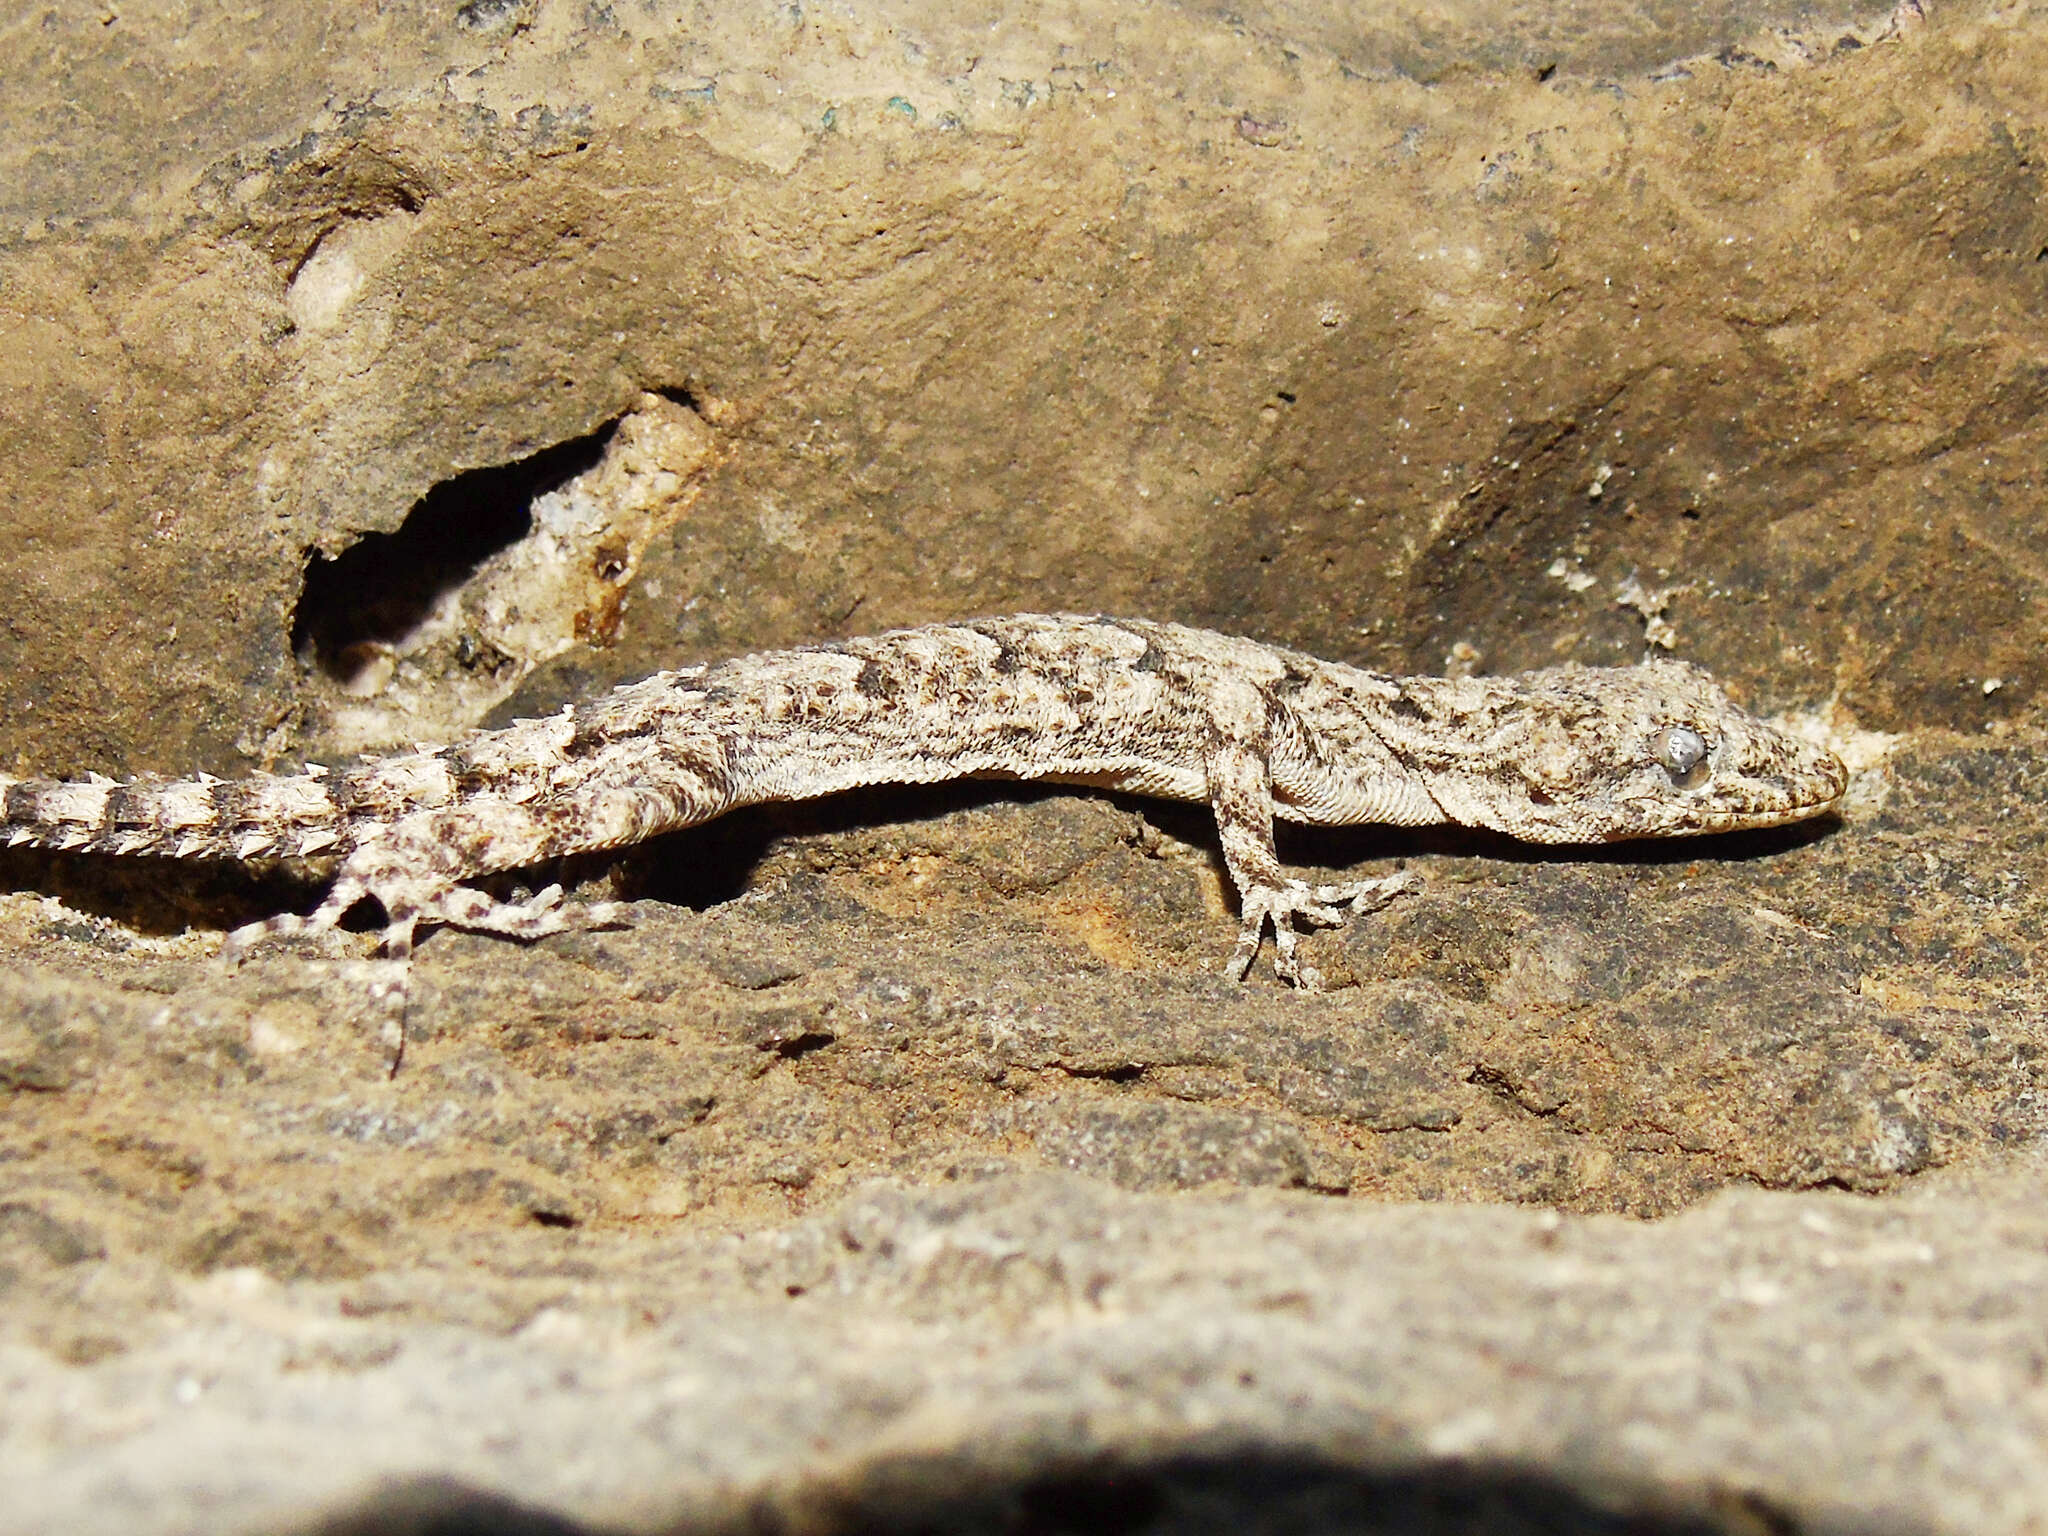 Image of Asia Minor Thin-toed Gecko